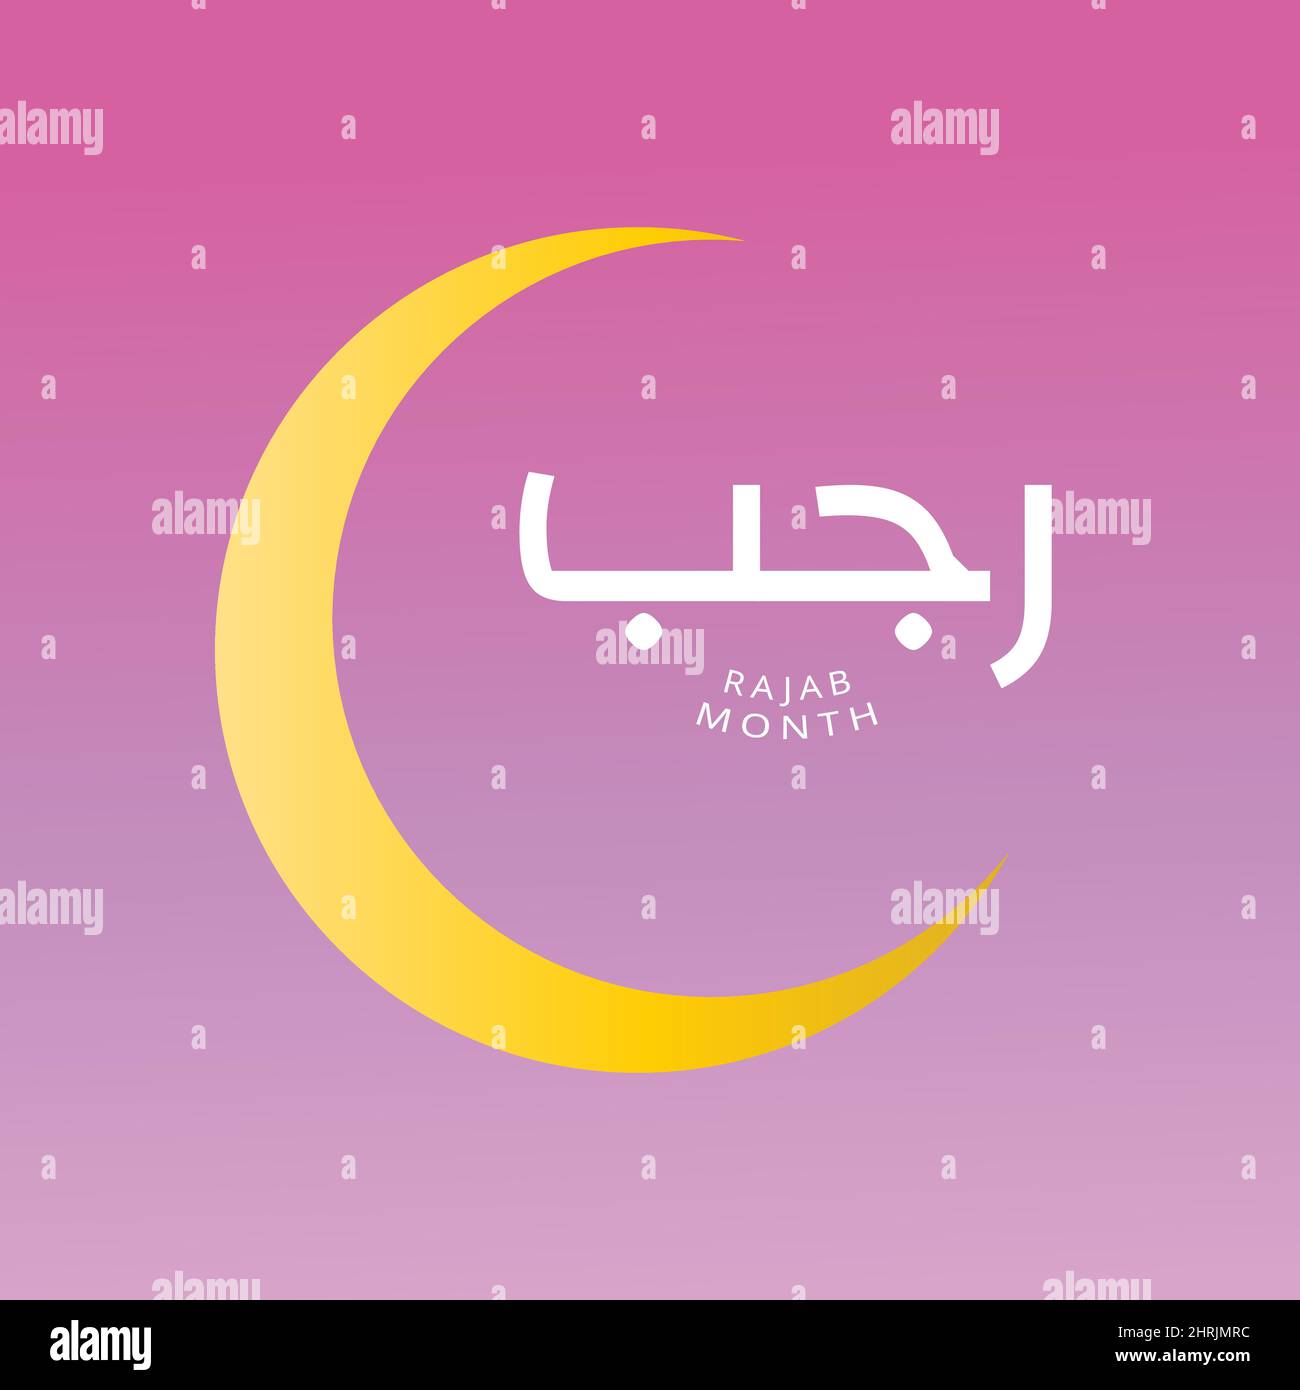 Rajab is the seventh month of the Islamic calendar. The lexical